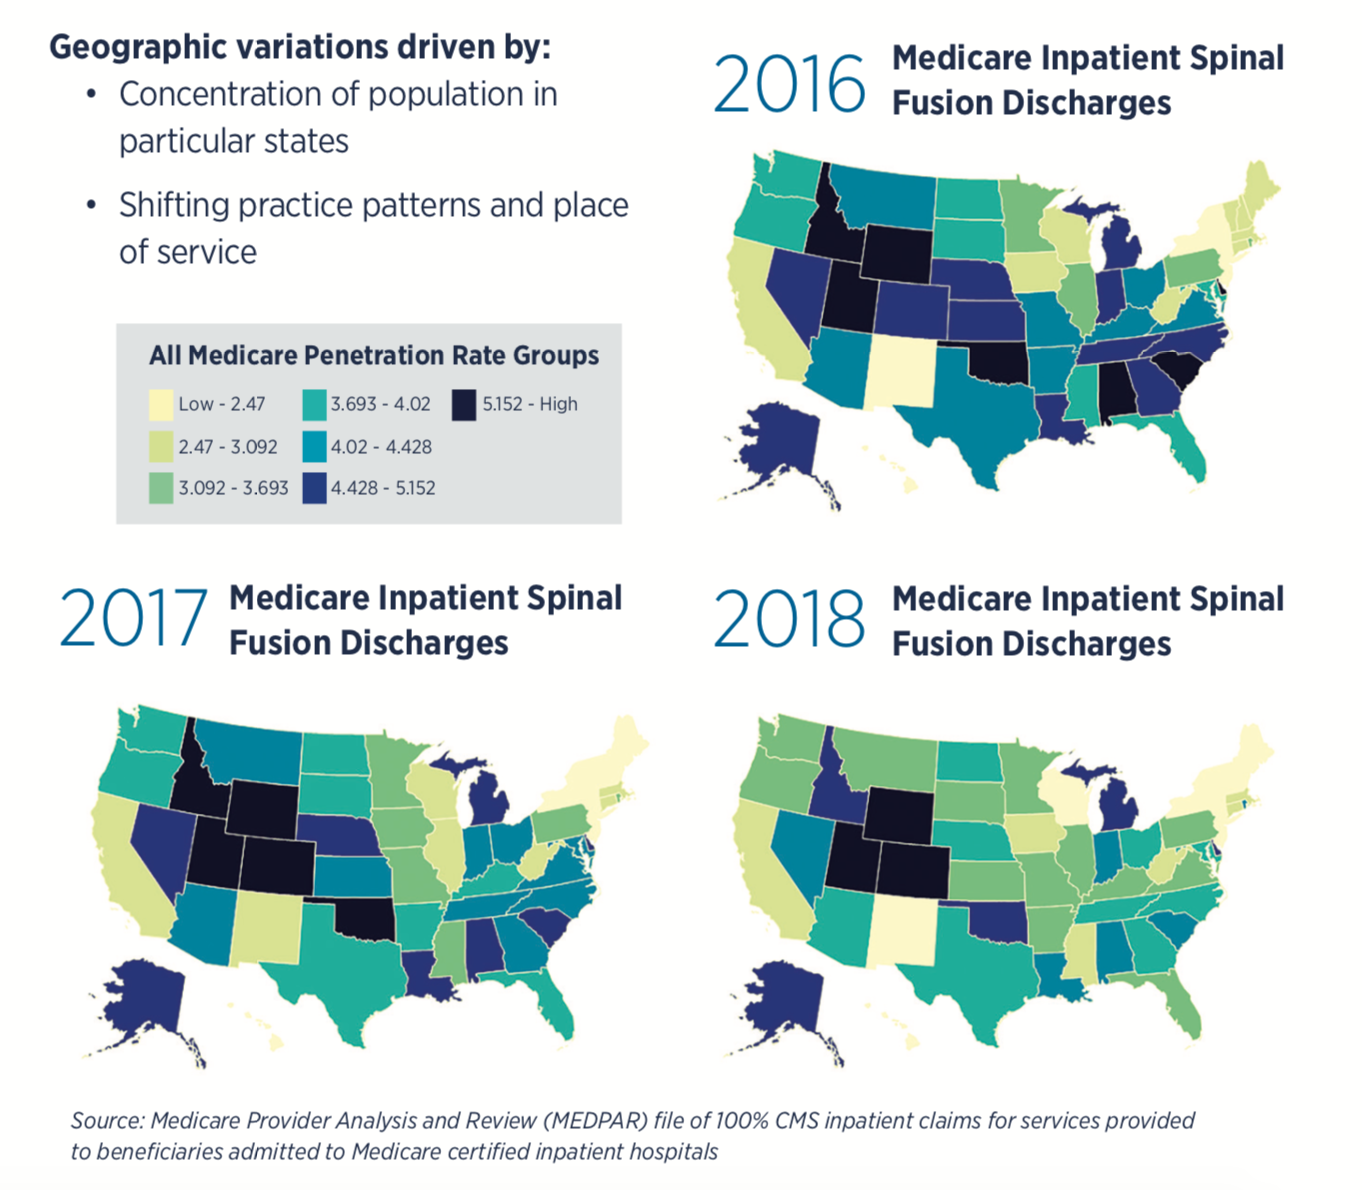 Charts for the years 2016, 2017, and 2018 displaying the data for the Medicare Inpatient Spinal Fusion Discharges by state.Medicare Provider analysis and Review file of 100% CMS inpatient claims for services provided to beneficiaries admitted to Medicare certified inpatient hospitals.